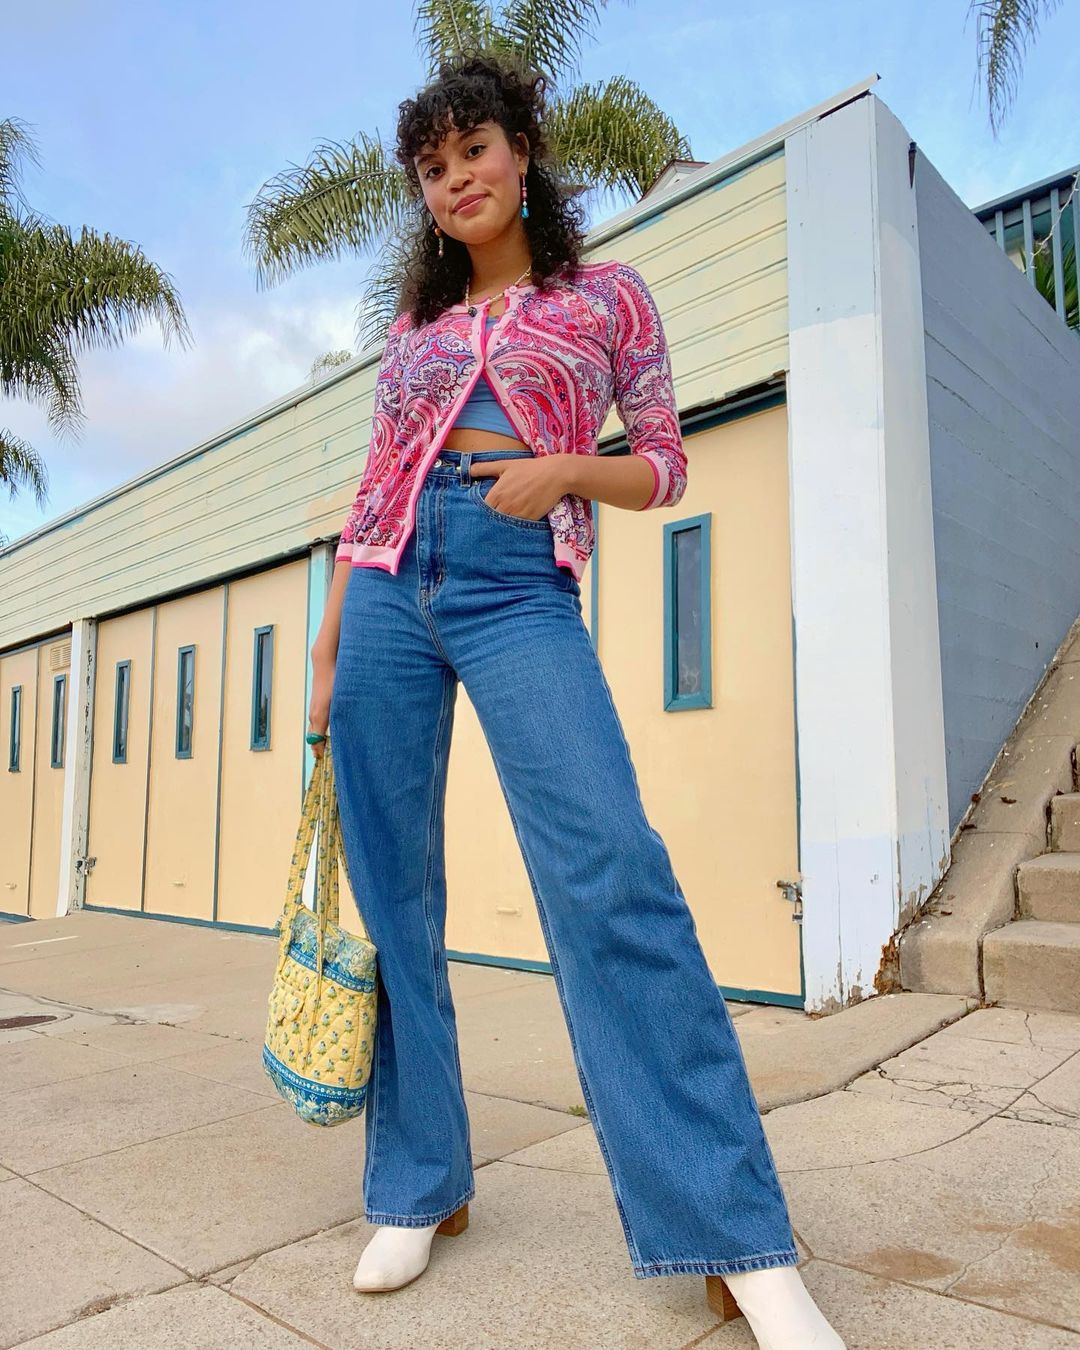 4 Shoe Styles to Wear with Flare Jeans That Look So Chic Who What Wear